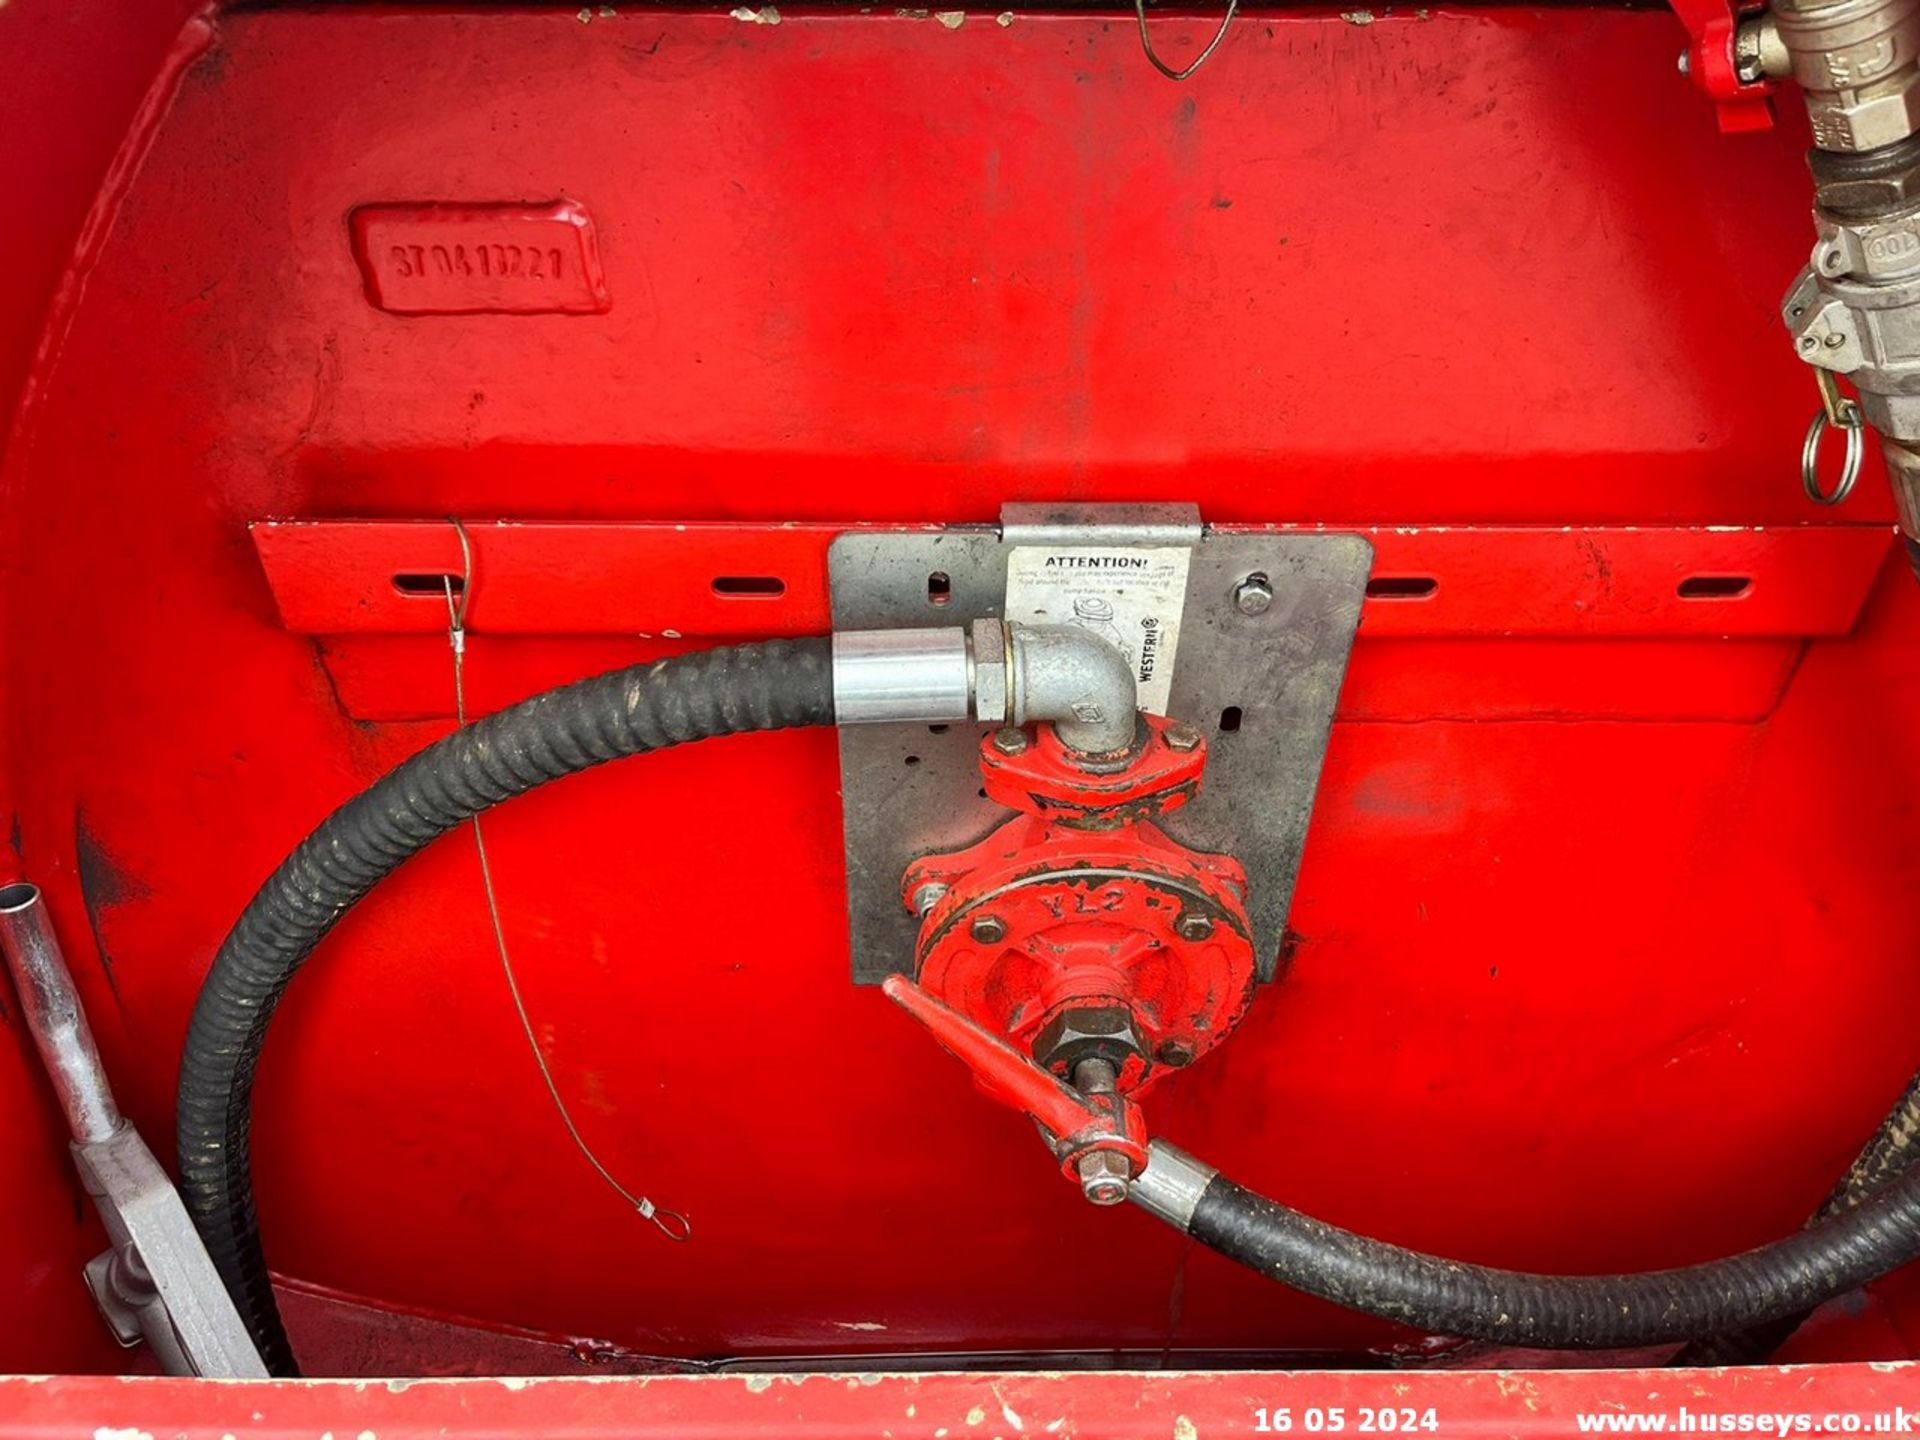 WESTERN ABBI 950 LTR FAST TOW DIESEL BOWSER C.W K2 HAND PUMP - Image 3 of 9